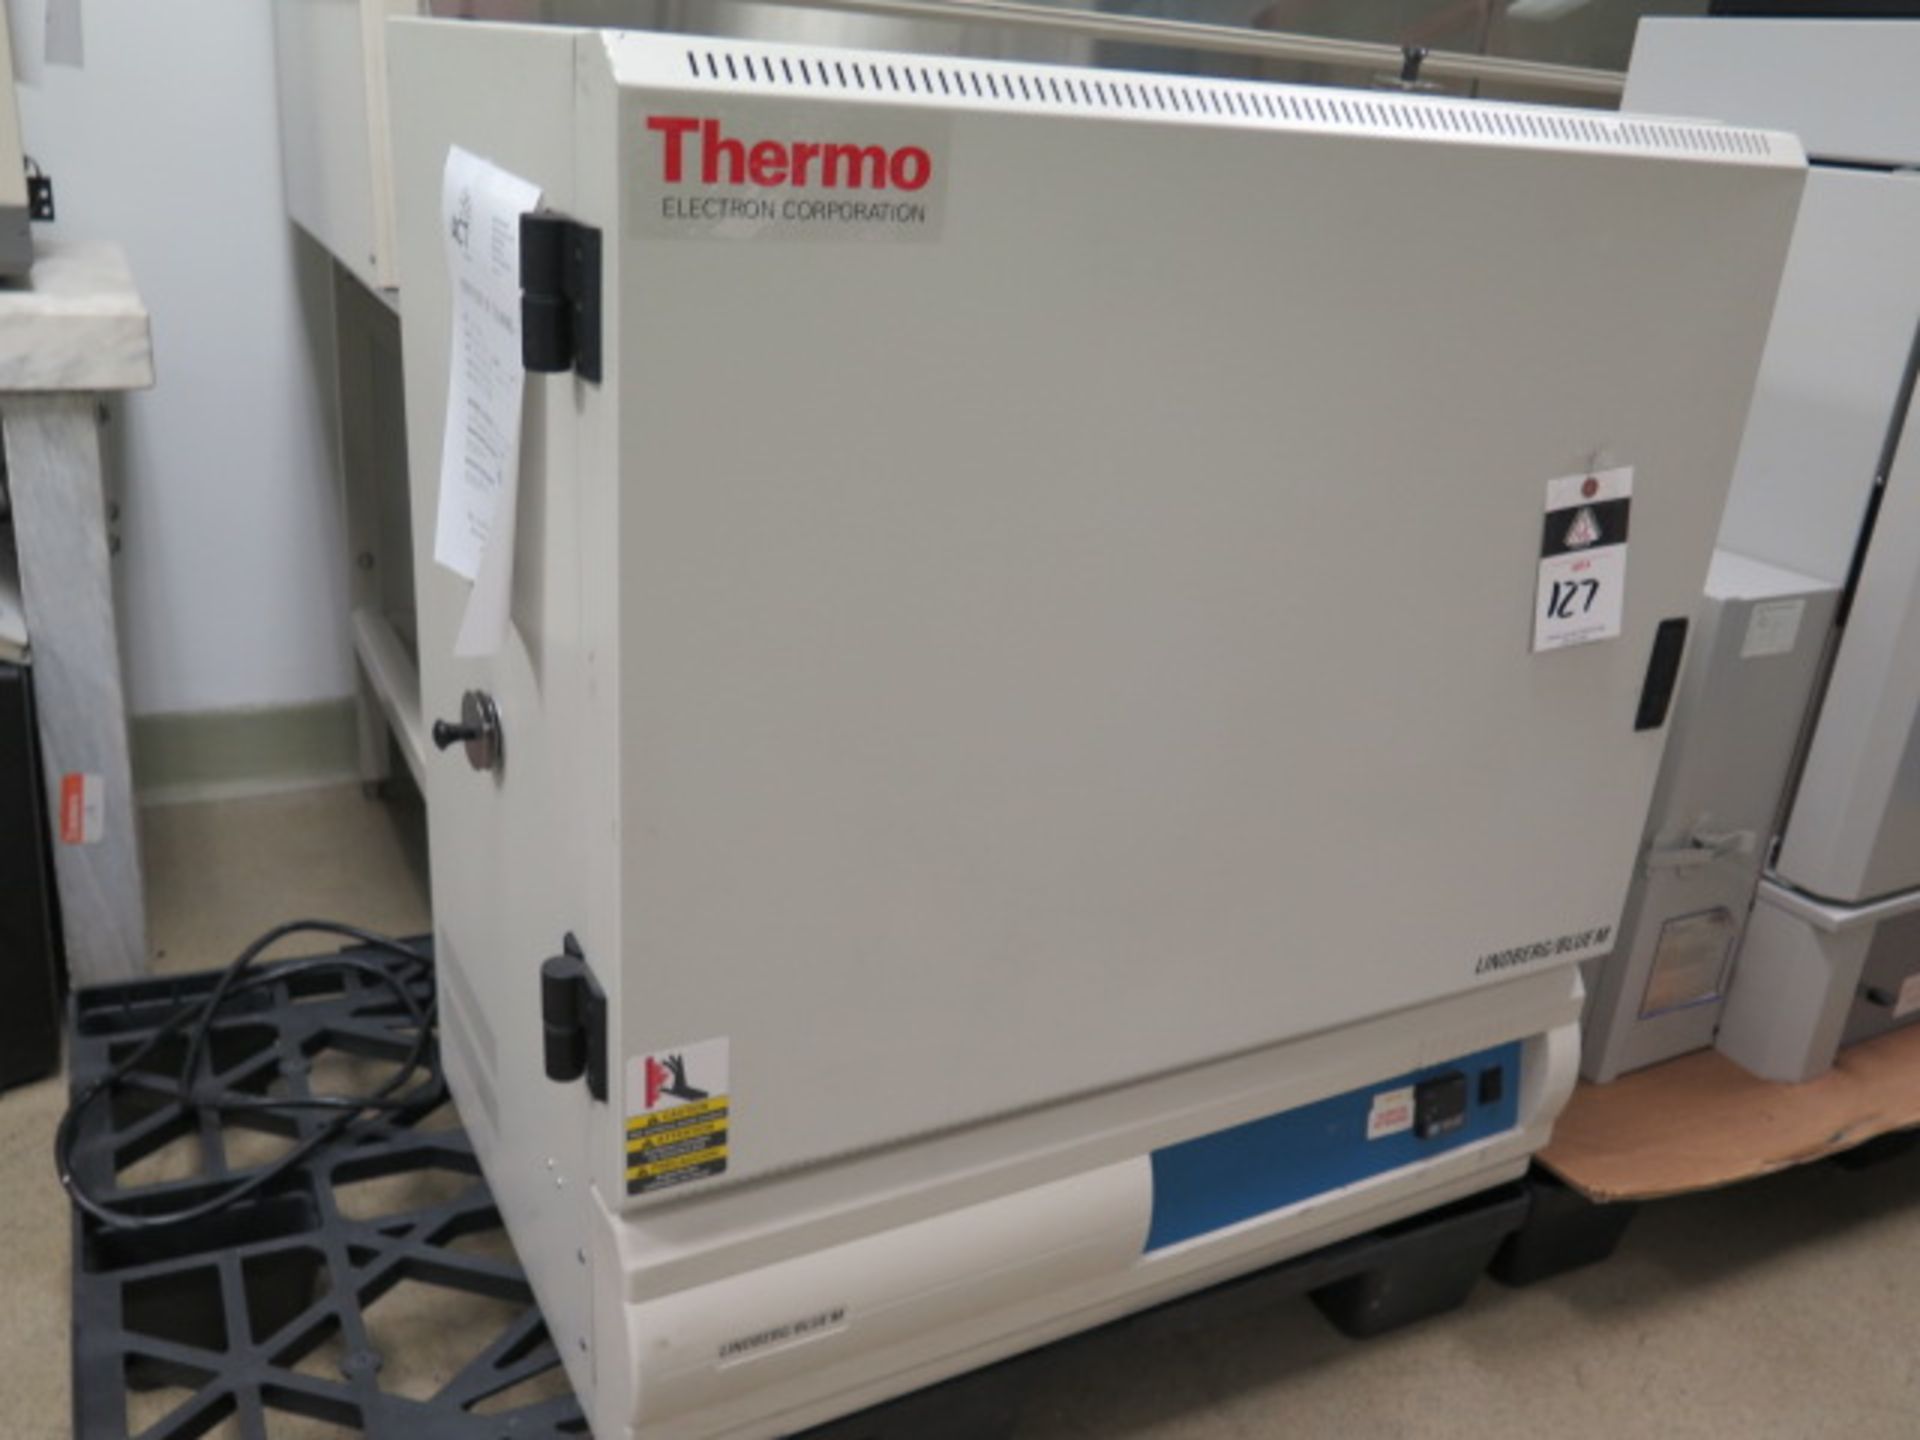 Thermo Electron Lindberg / BlueM mdl. MO1440A-1 Oven s/n Z15R-509008-ZR 300 Degrees C, SOLD AS IS - Image 4 of 8